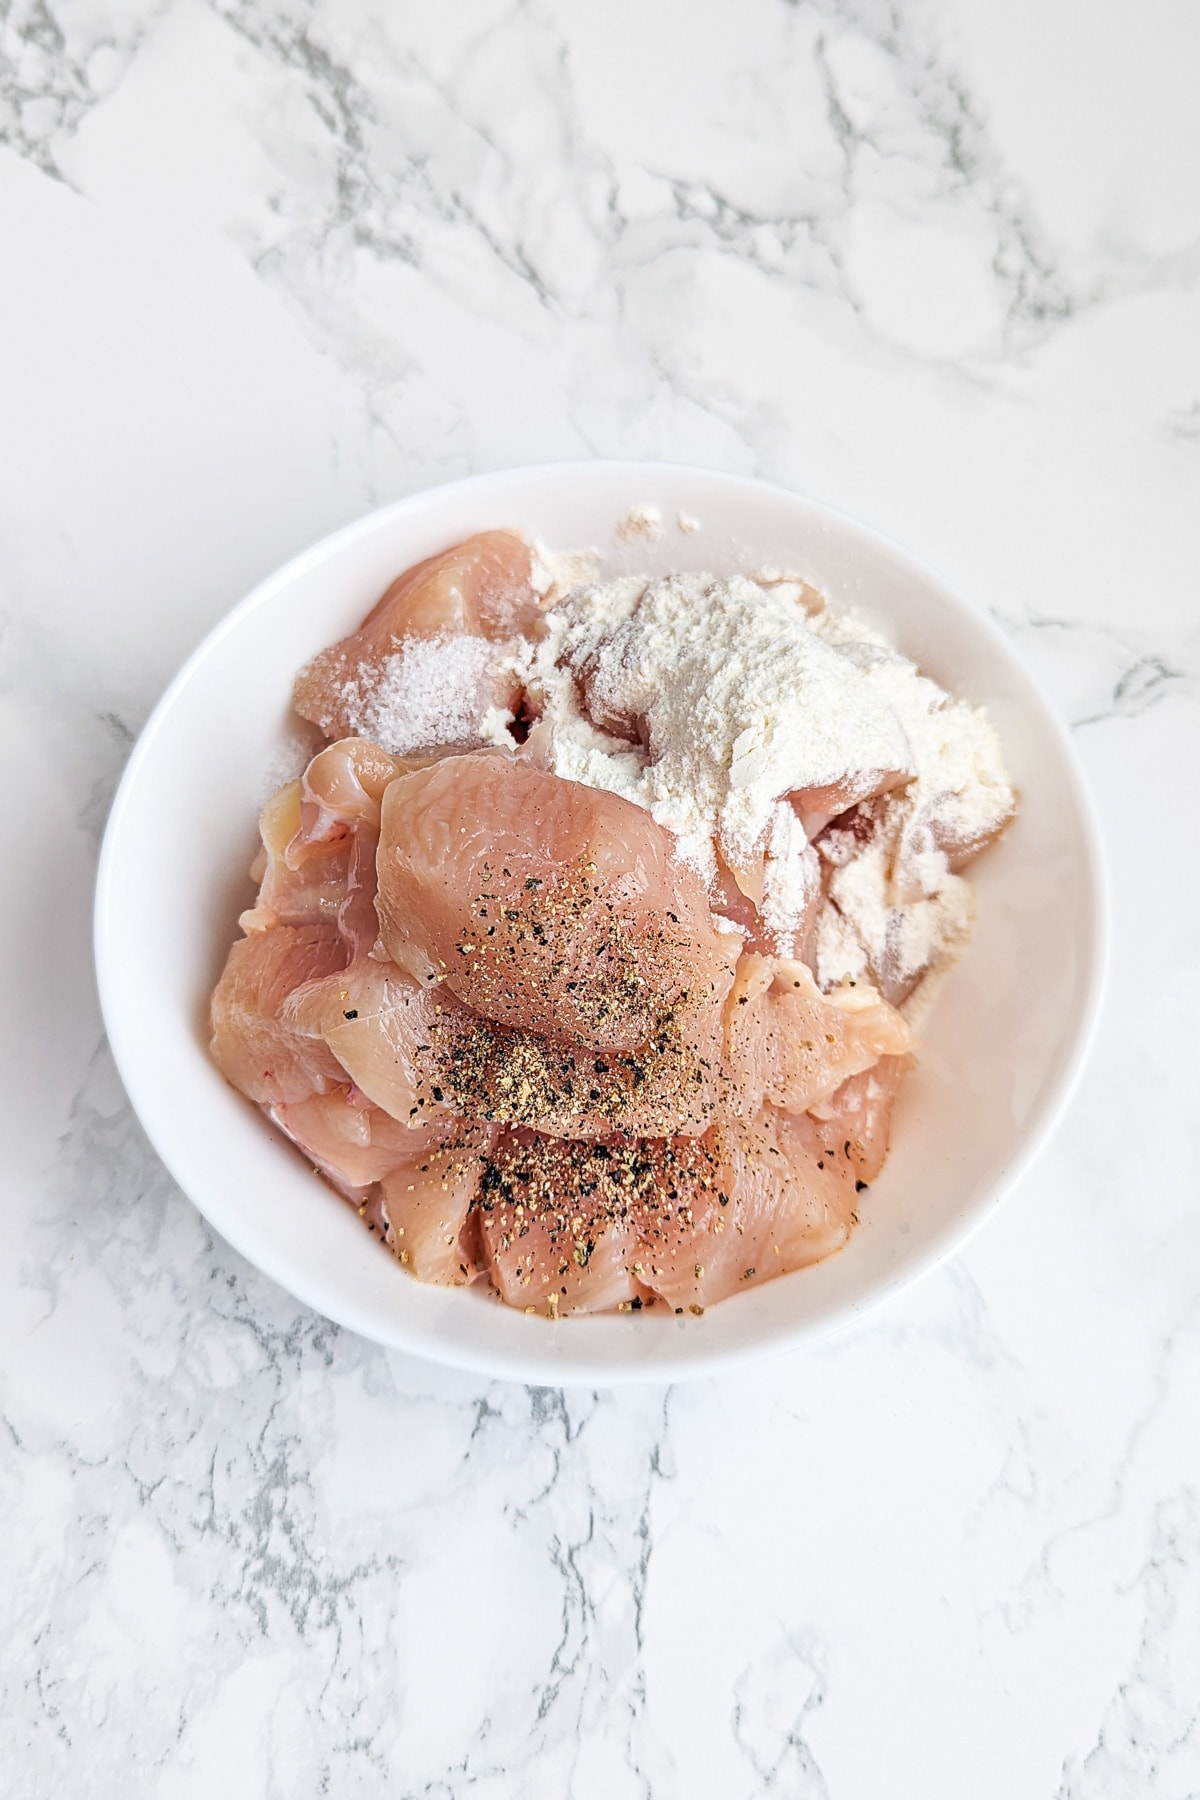 Raw chicken pieces seasoned with salt, pepper, and flour in a white bowl, ready for cooking.